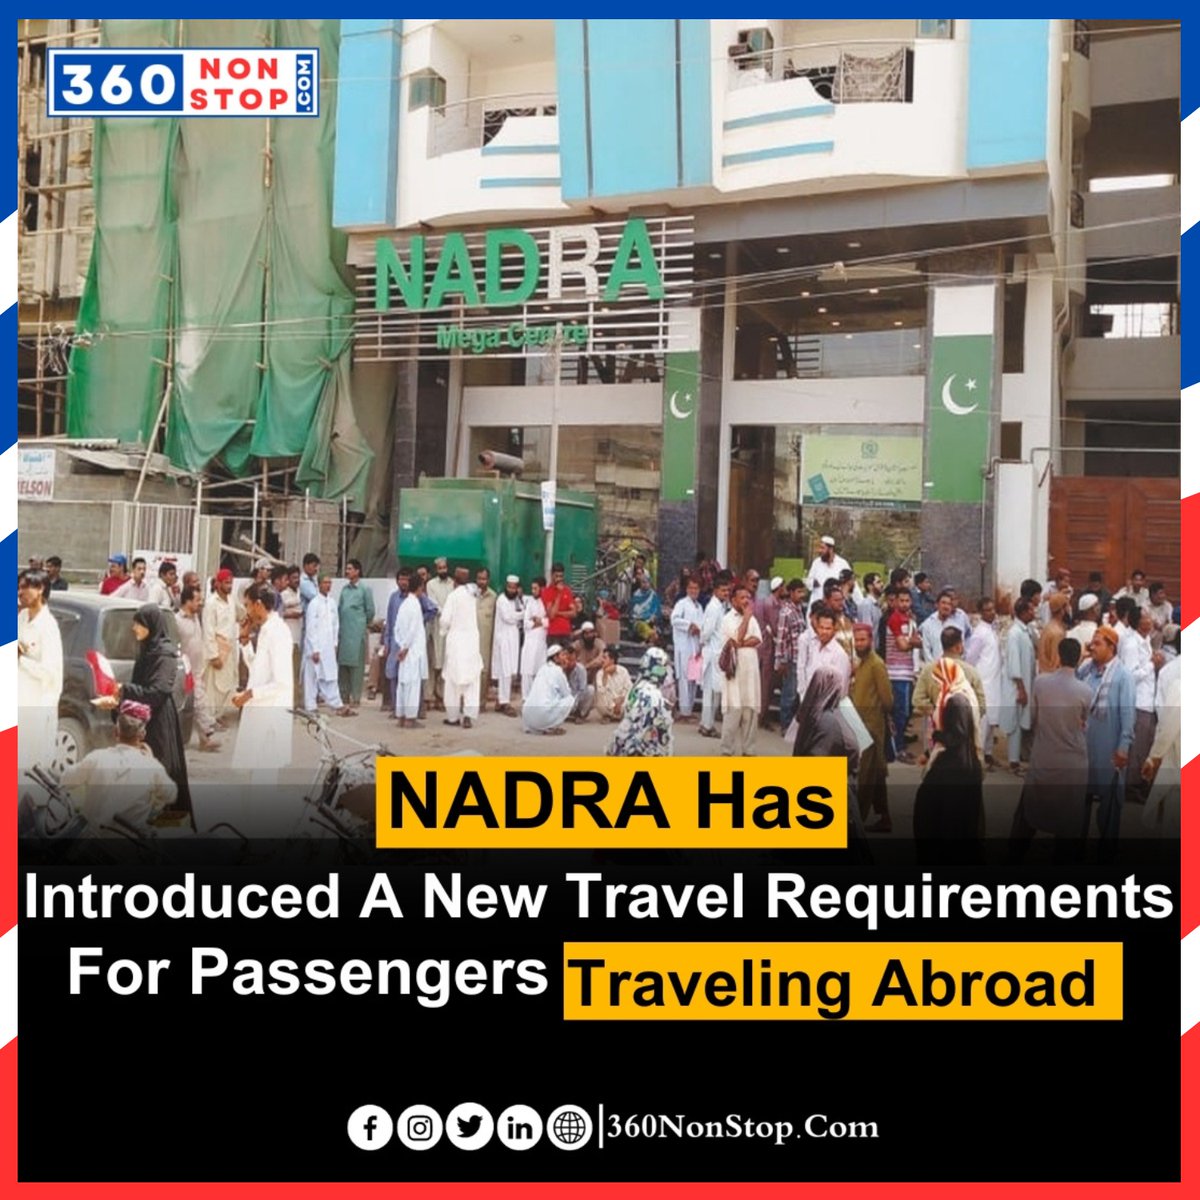 NADRA has Introduced A New Travel Requirements  For Passengers Travelling Abroad.
#NADRA #TravelRequirements #PassportUpdates #InternationalTravel #PassengerInformation #TravelAbroad #TravelGuidelines #ImmigrationUpdates #TravelDocuments #PassportRules #360Nonstop